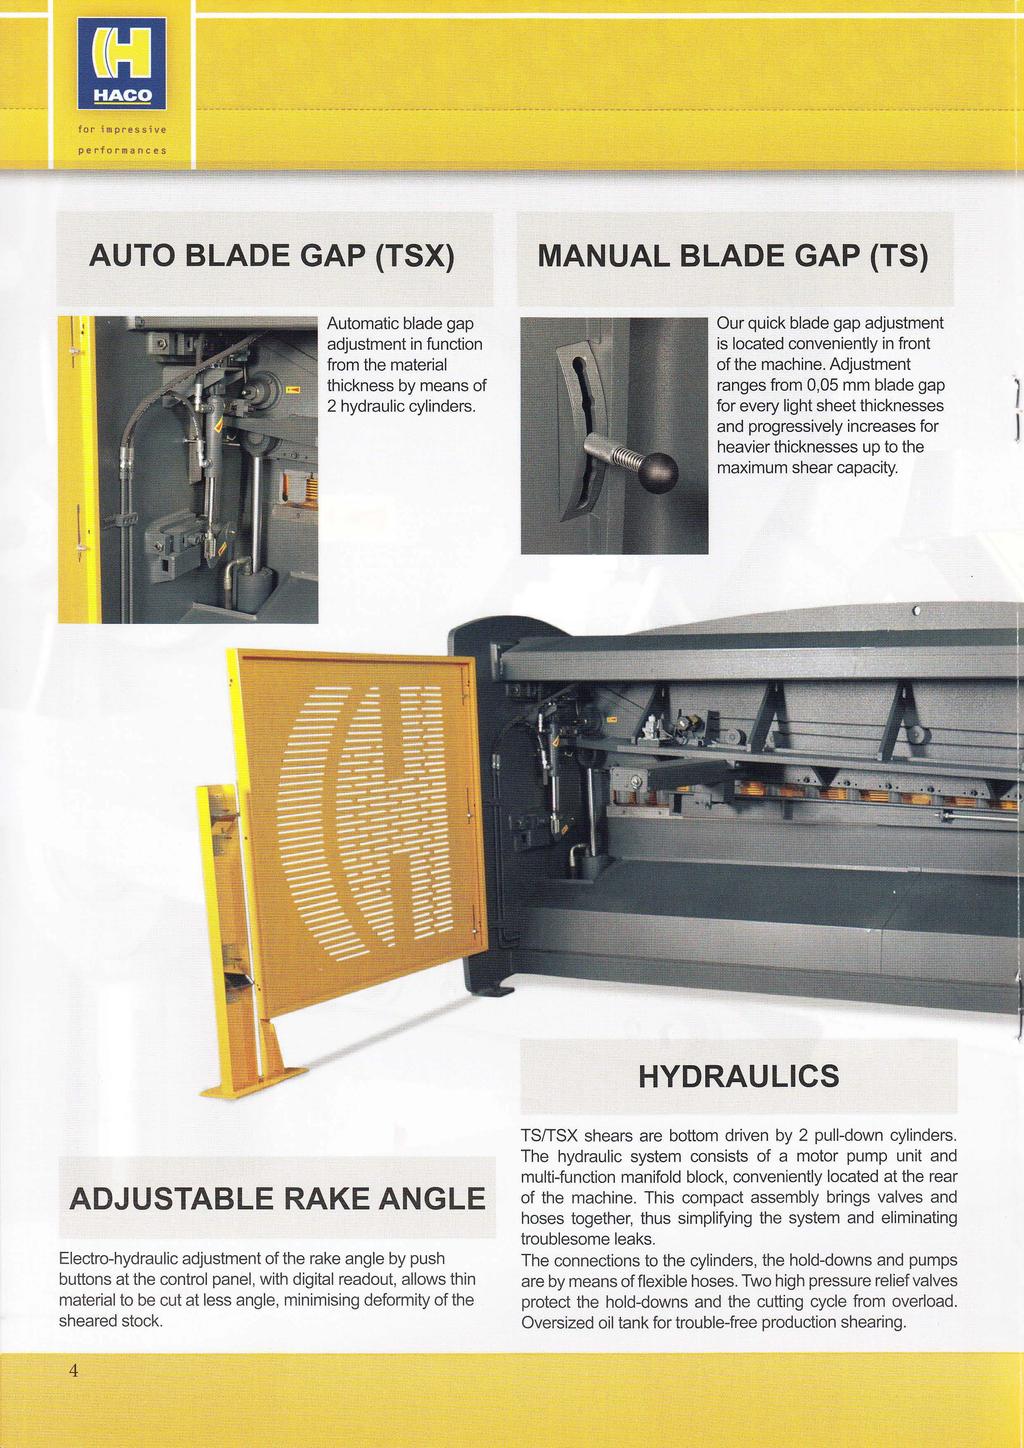 for impresslve AUTO BLADE GAP (TSX) Automatic blade gap adjustment in function from the material thickness by means of 2 hydraulic cylinders.